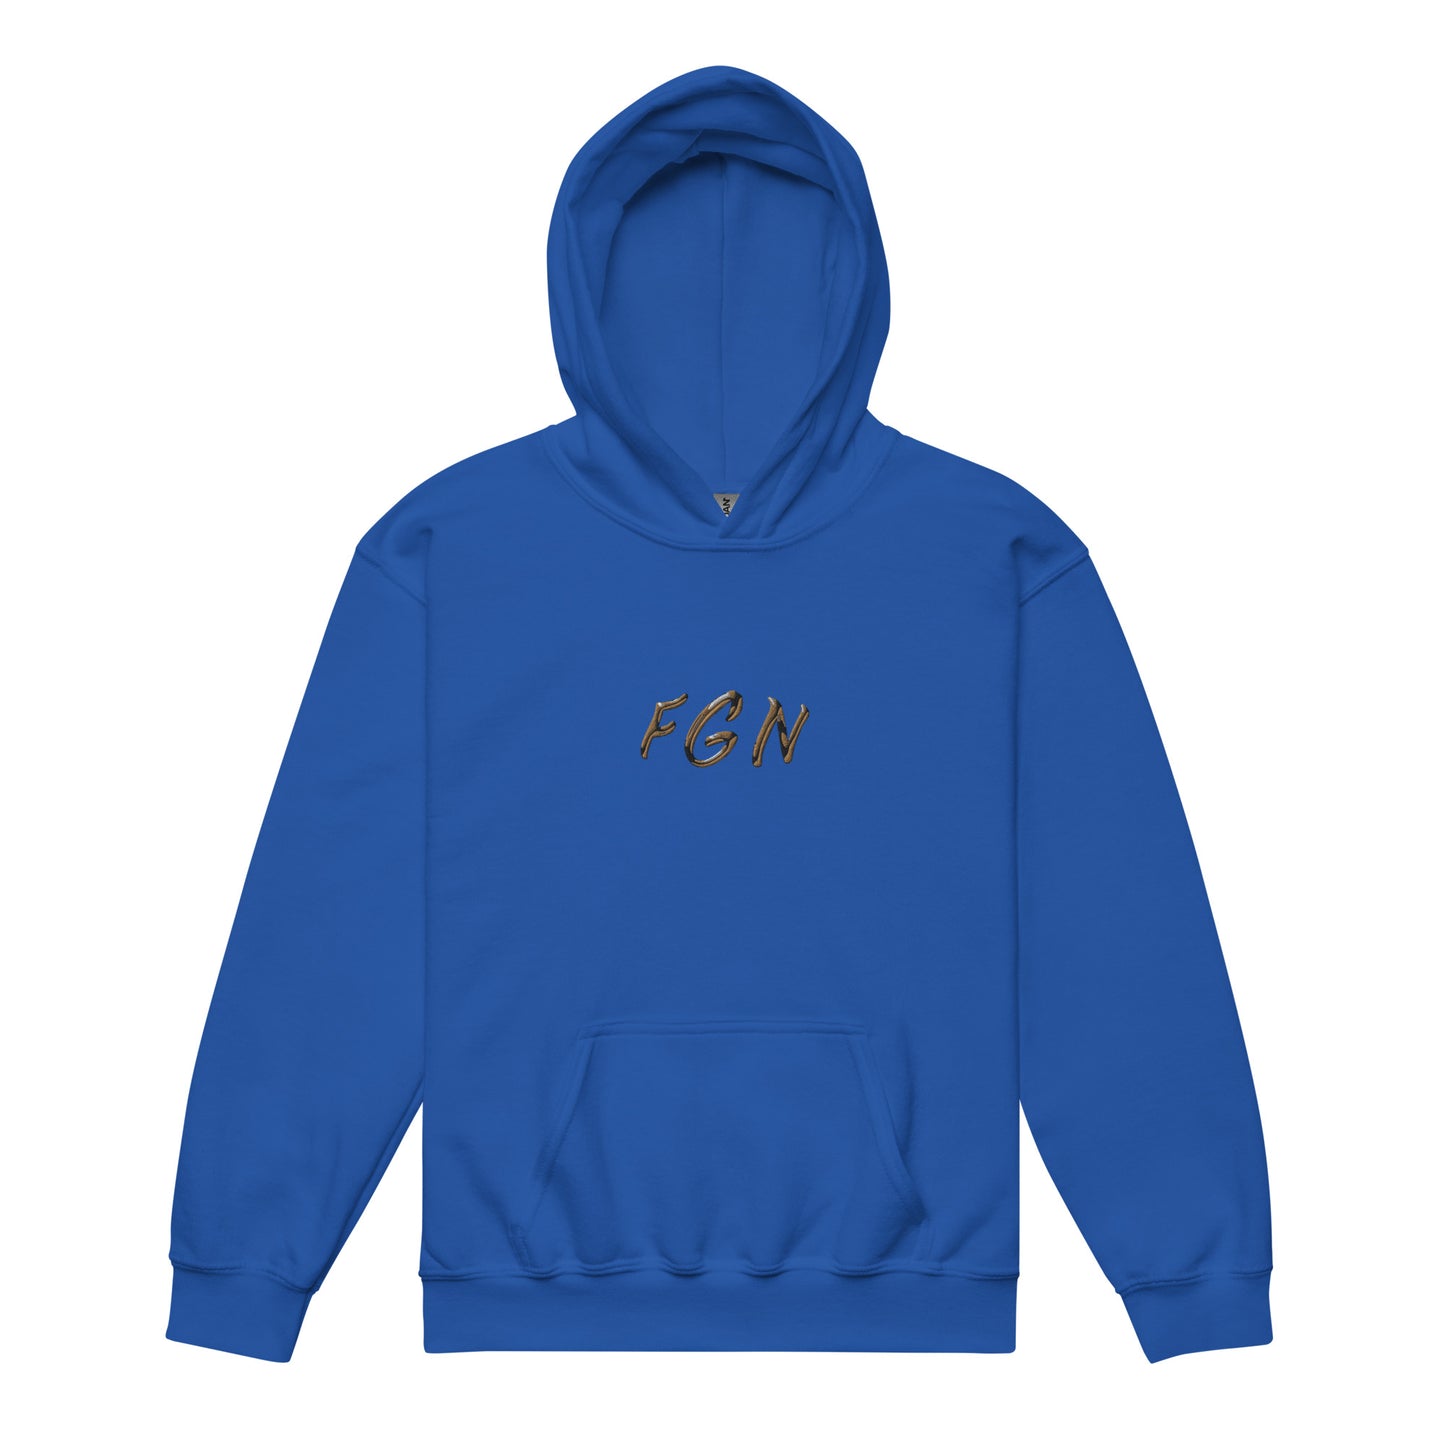 Double Sided Youth FGN Hoodie (Embroidered)